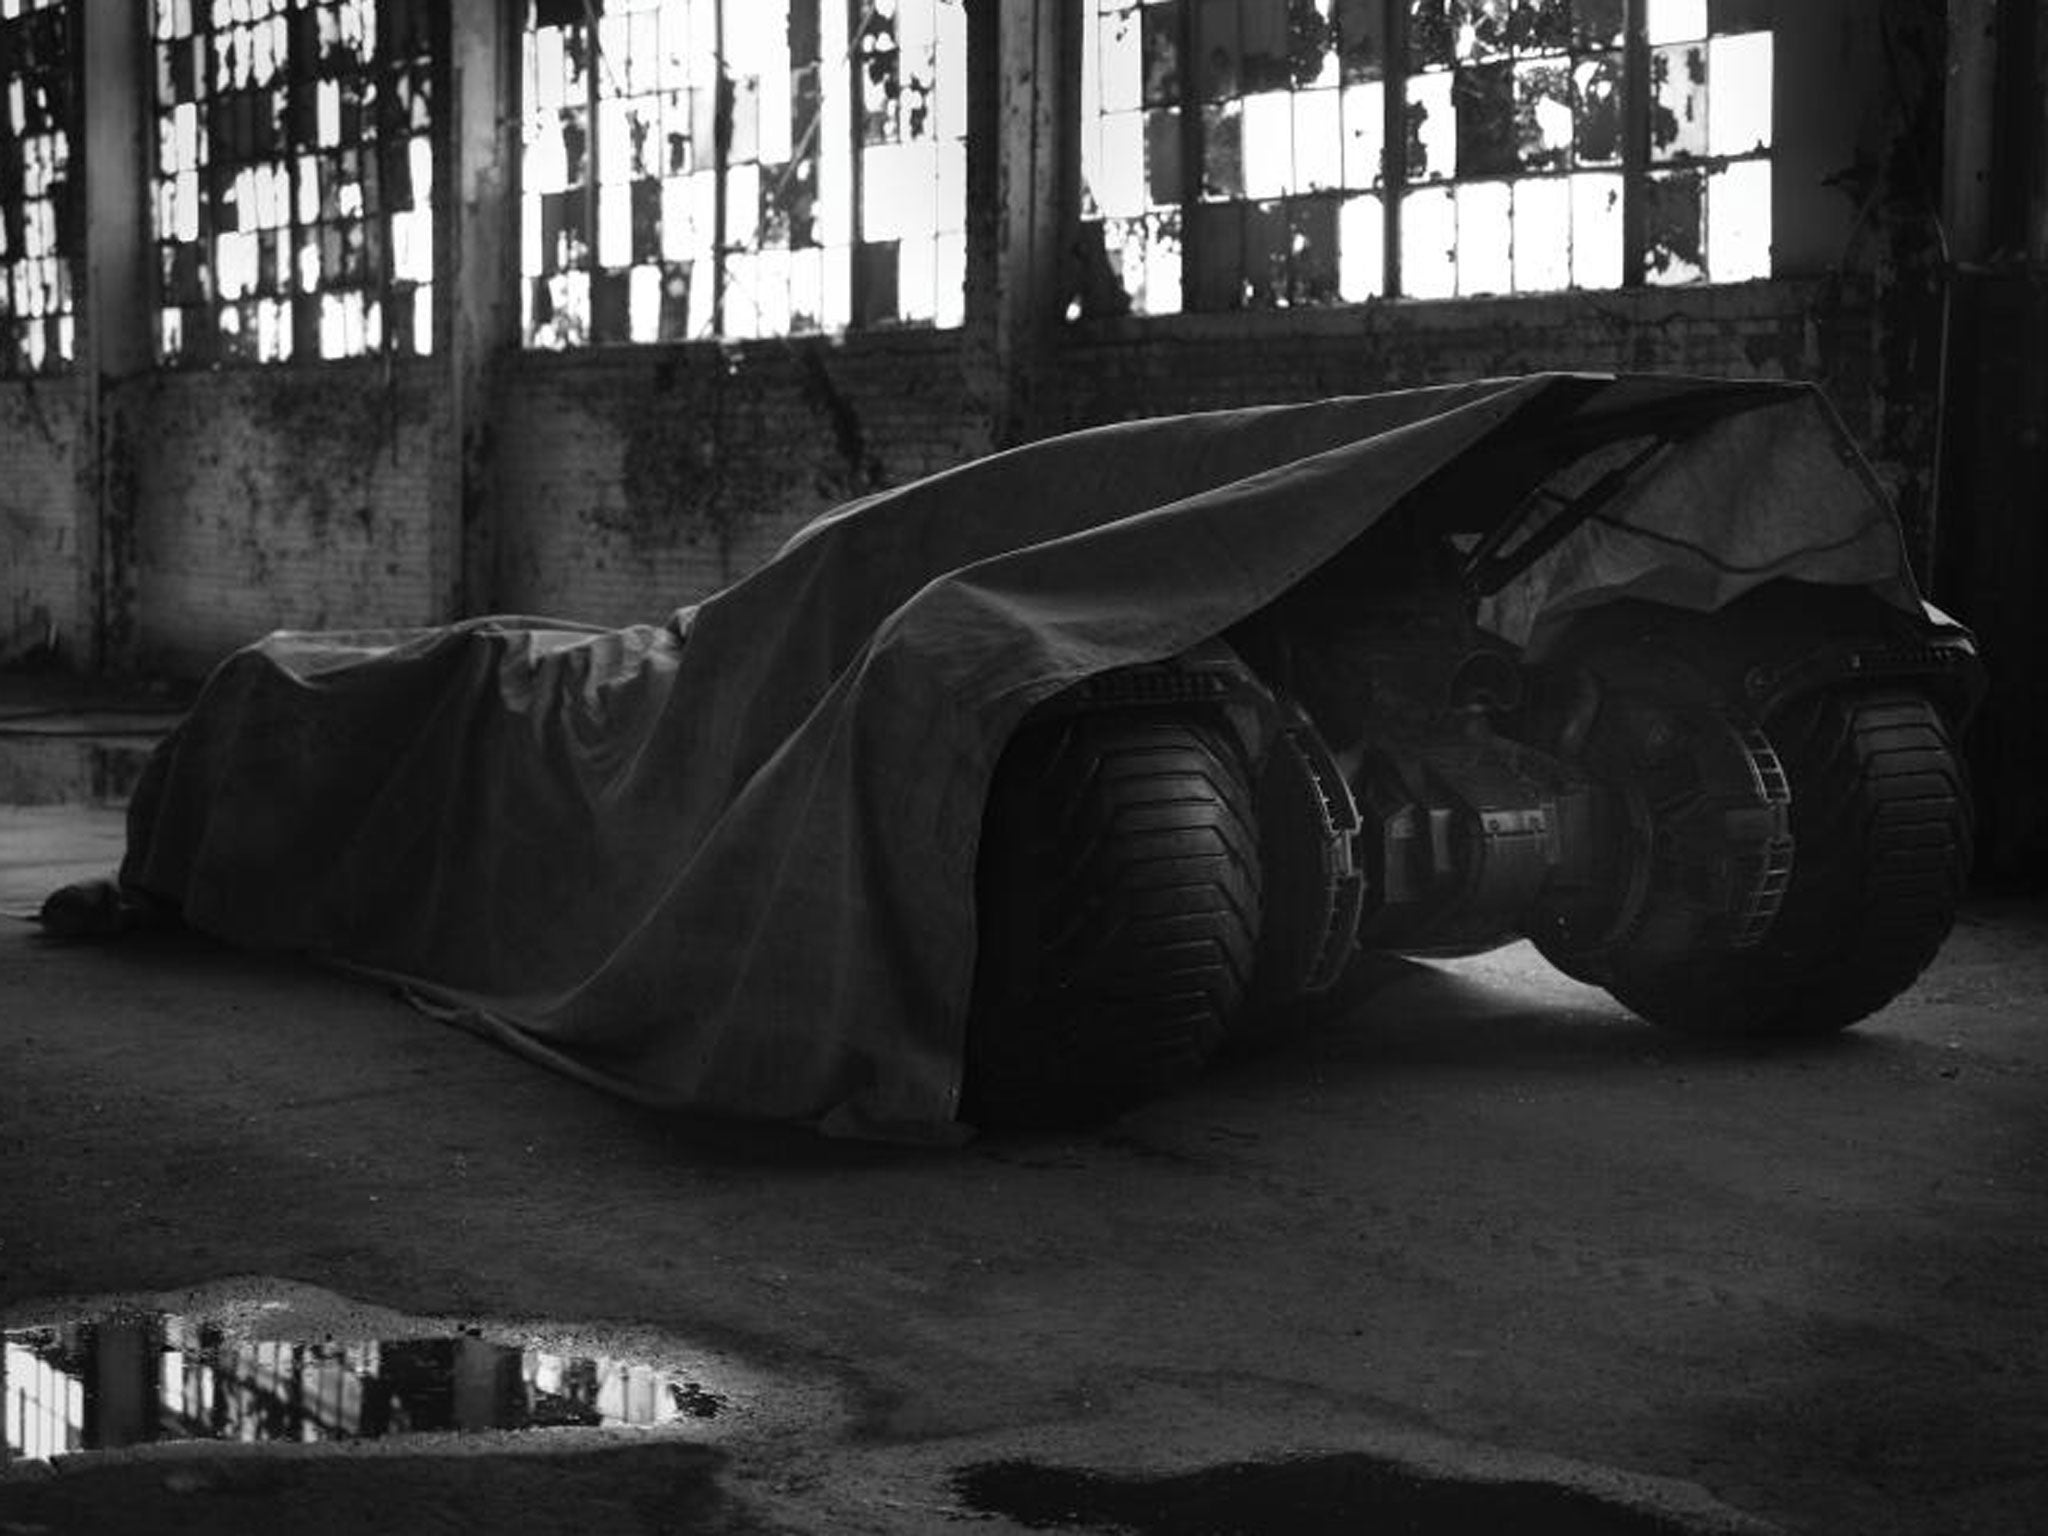 Batman vs Superman director Zack Snyder teased this image of the batmobile on Twitter but the movie is not due until 2016